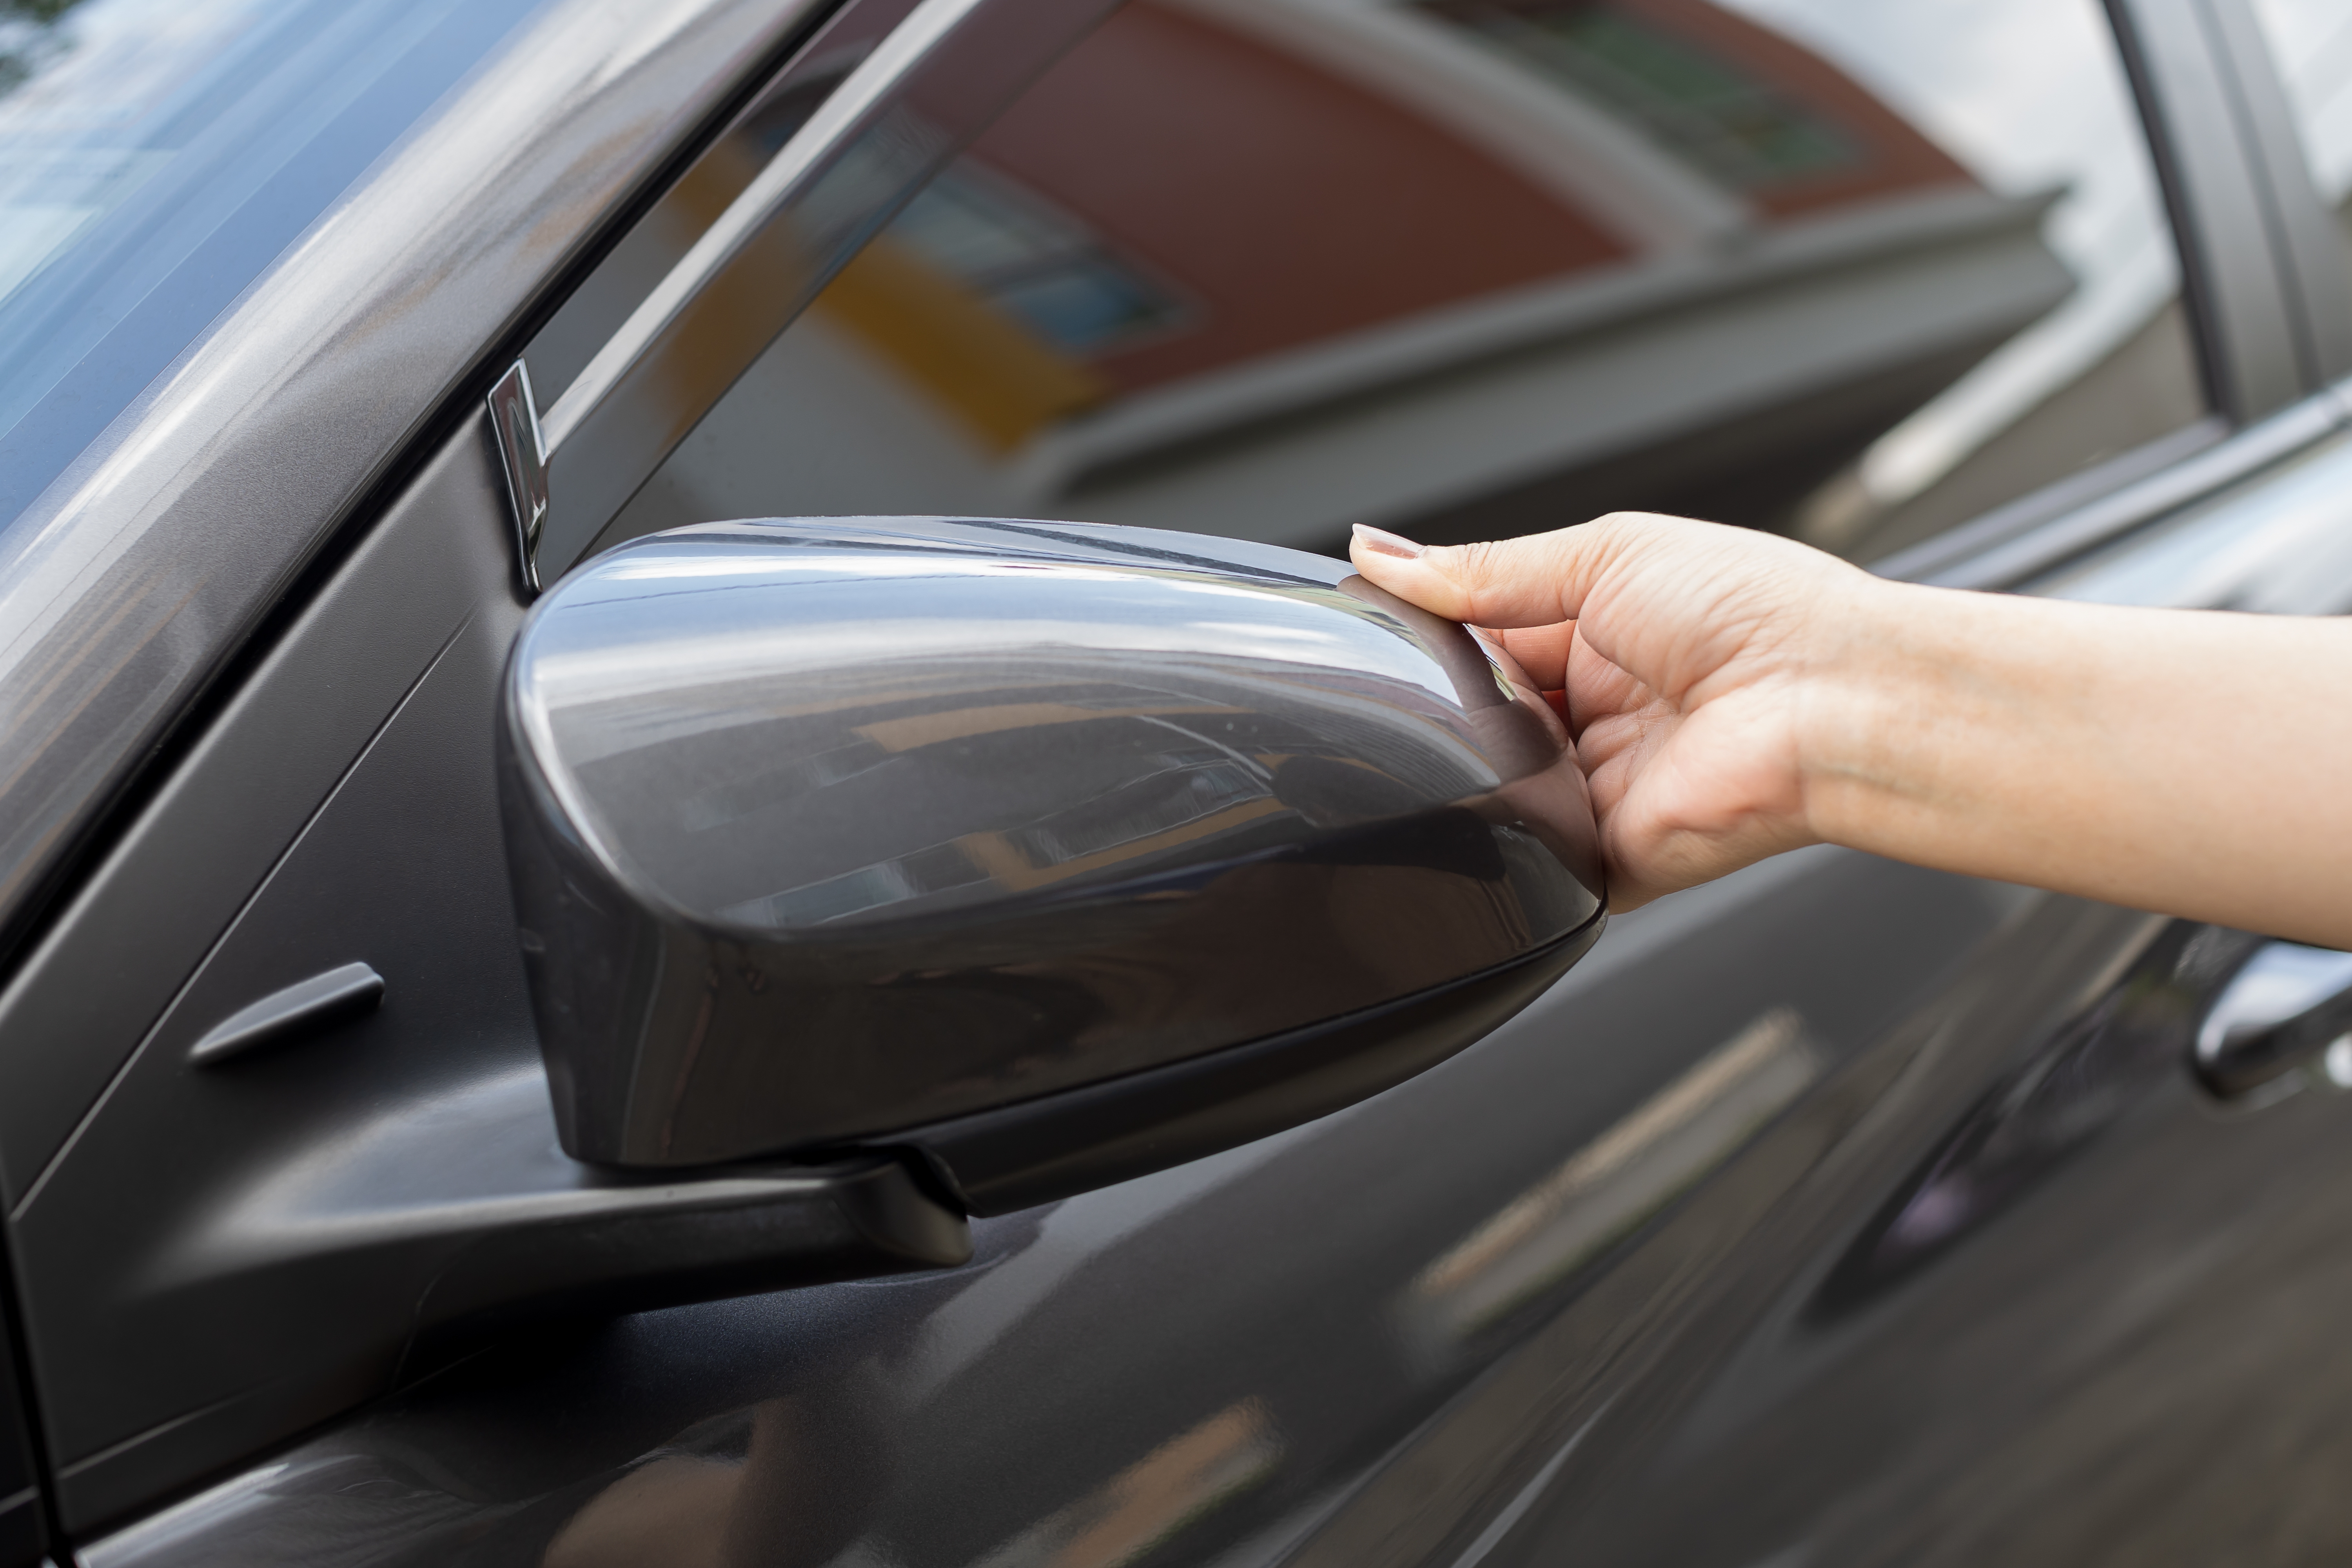 Folding your side mirrors in can help protect them from hail damage, or at least minimize it.